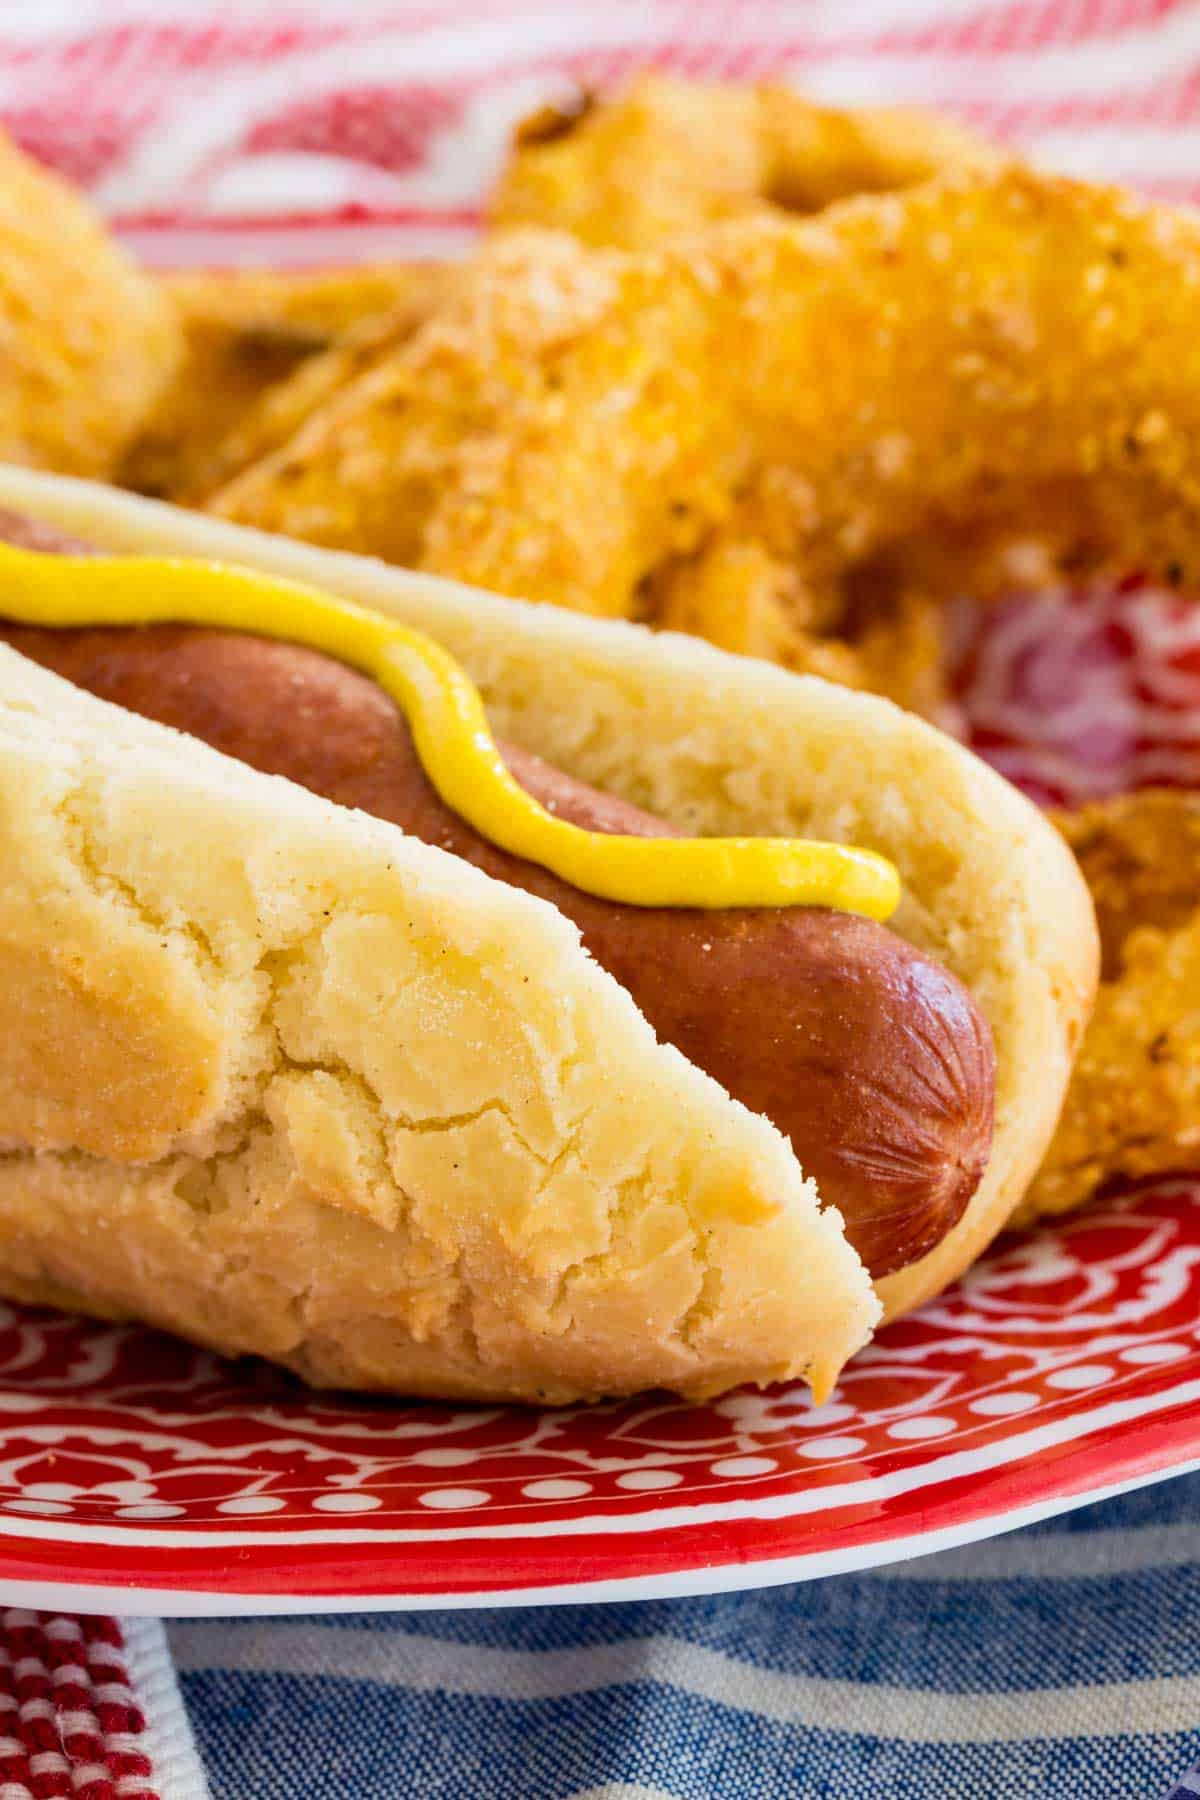 A gluten free hot dog topped with yellow mustard, served on a plate next to onion rings.